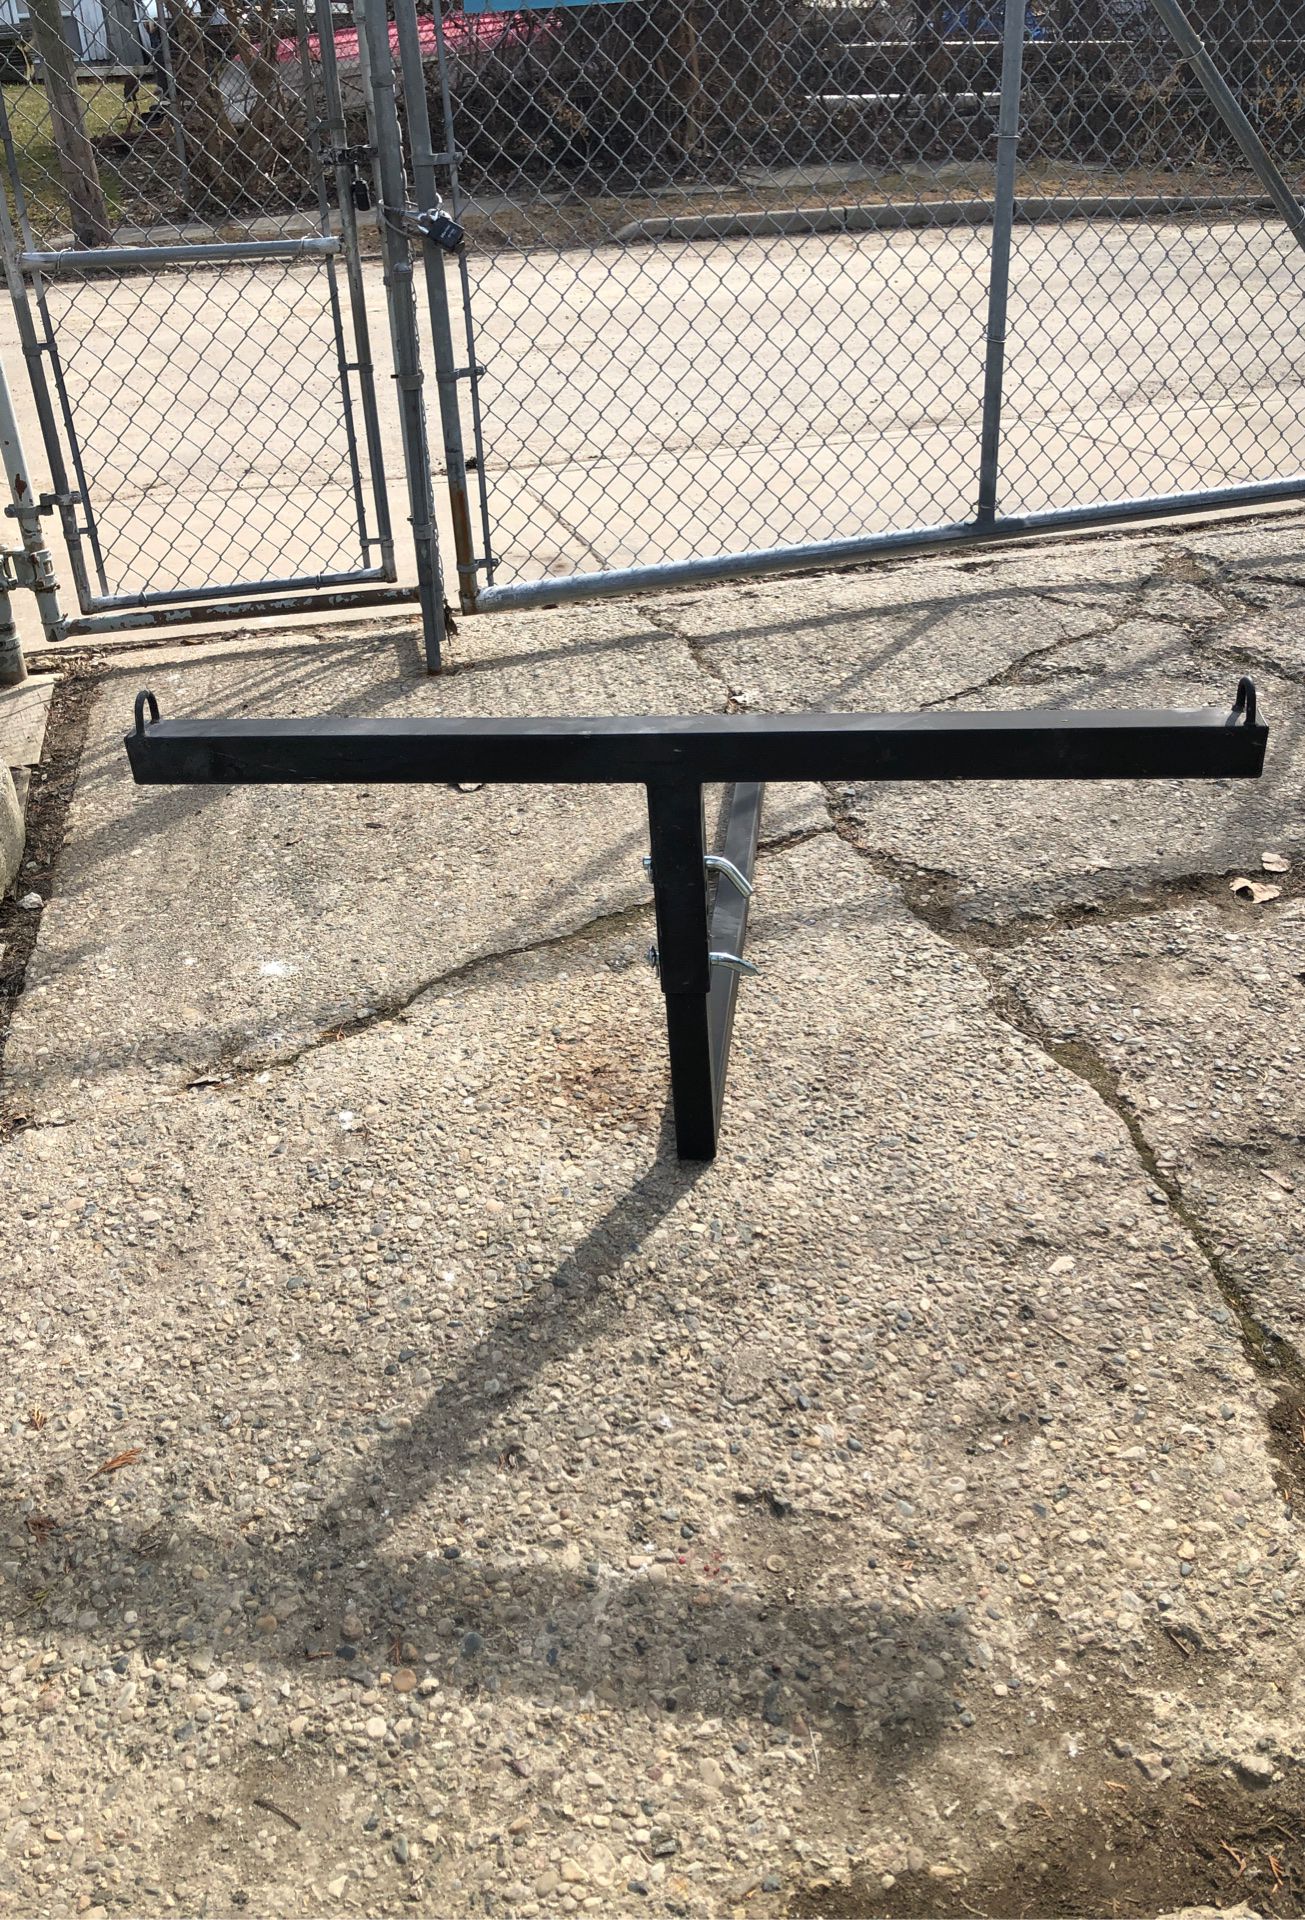 Pick up trailer extension 52 longAdjustable almost 2 feet high and can go lower steel